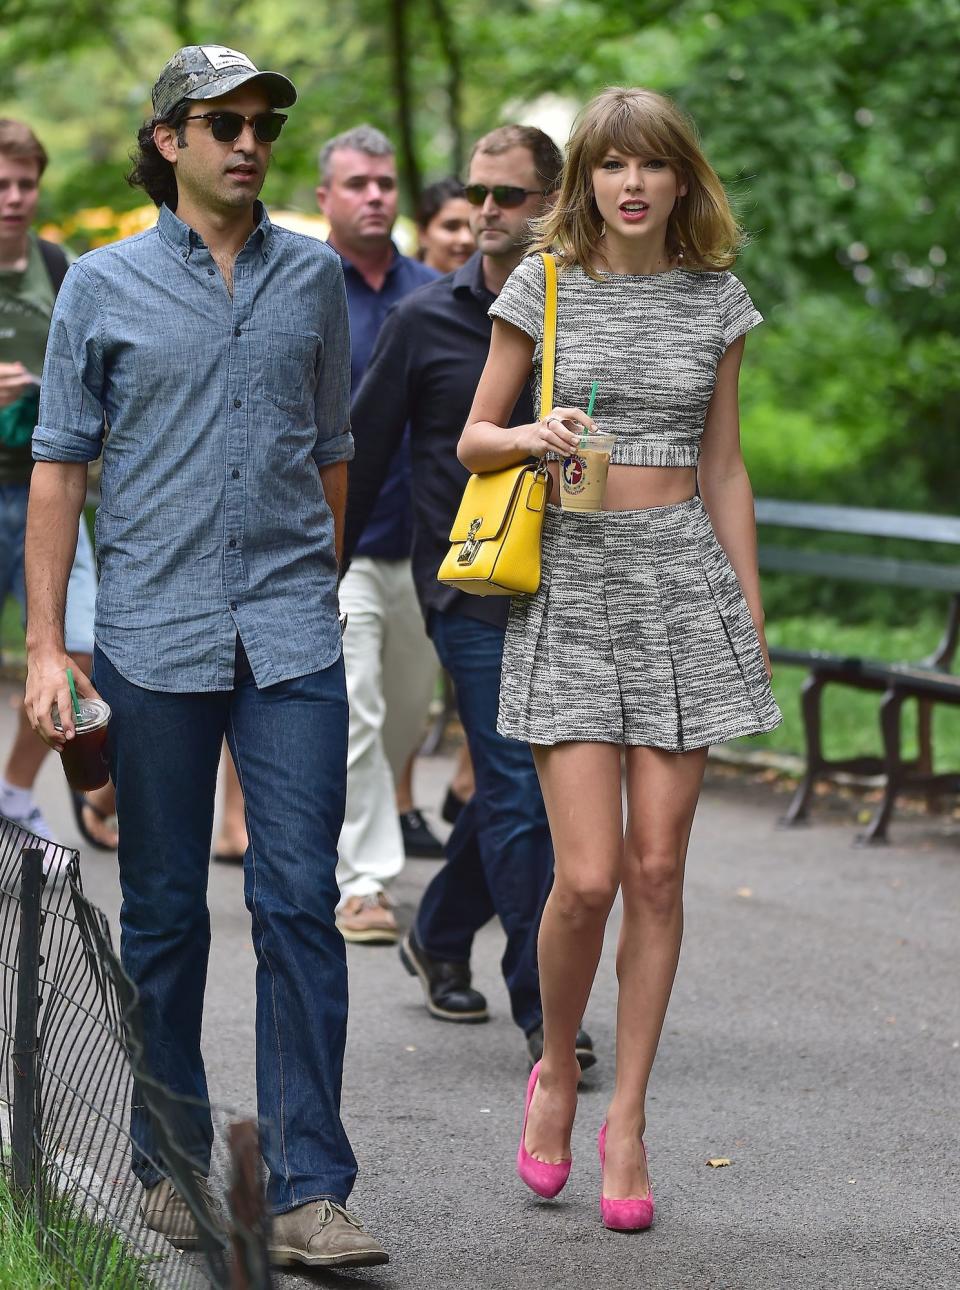 Taylor Swift in New York City on July 24, 2014.